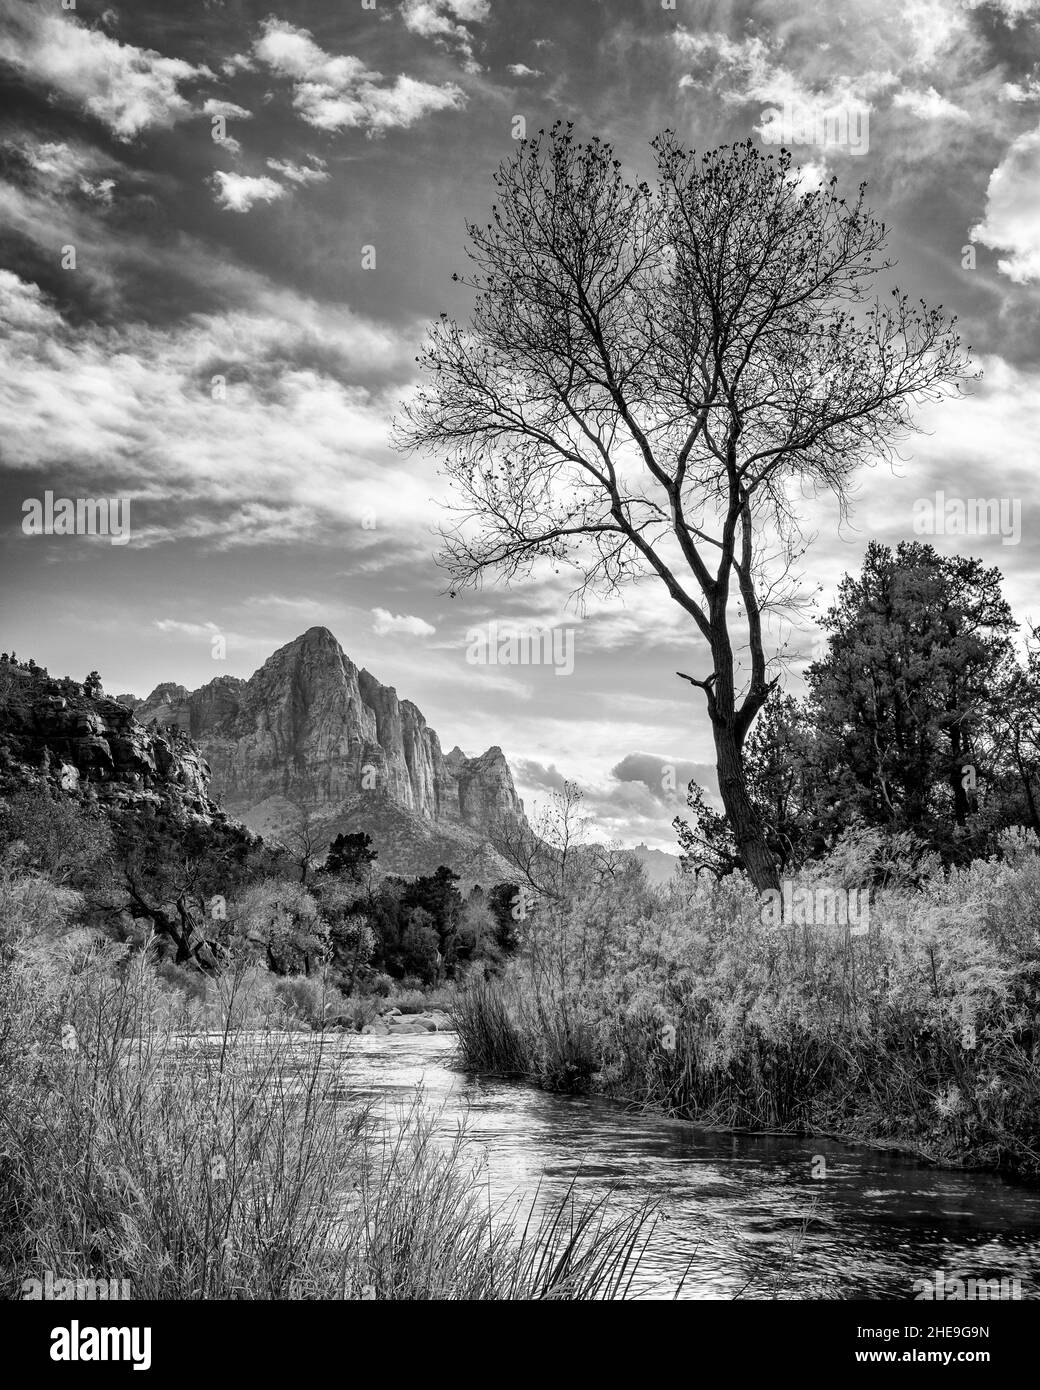 USA, Utah, Zion National Park, Virgin River and The Watchman near sunset (bw) Stock Photo